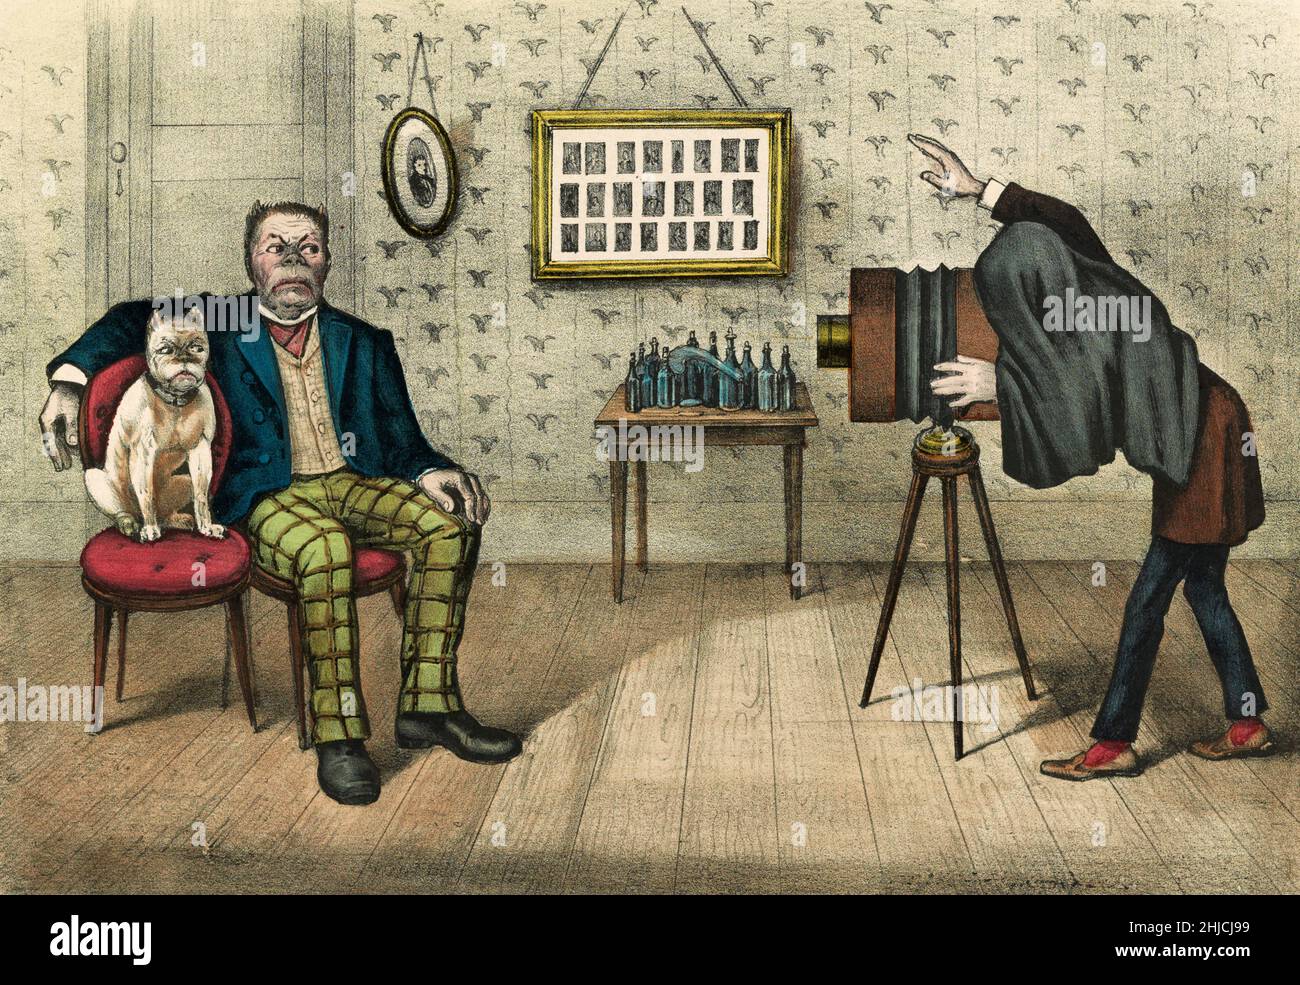 Comical print showing a photographer's studio with a man whose face matches his pet bulldog's; they are both scowling at the camera. Currier & Ives, 1890. Stock Photo